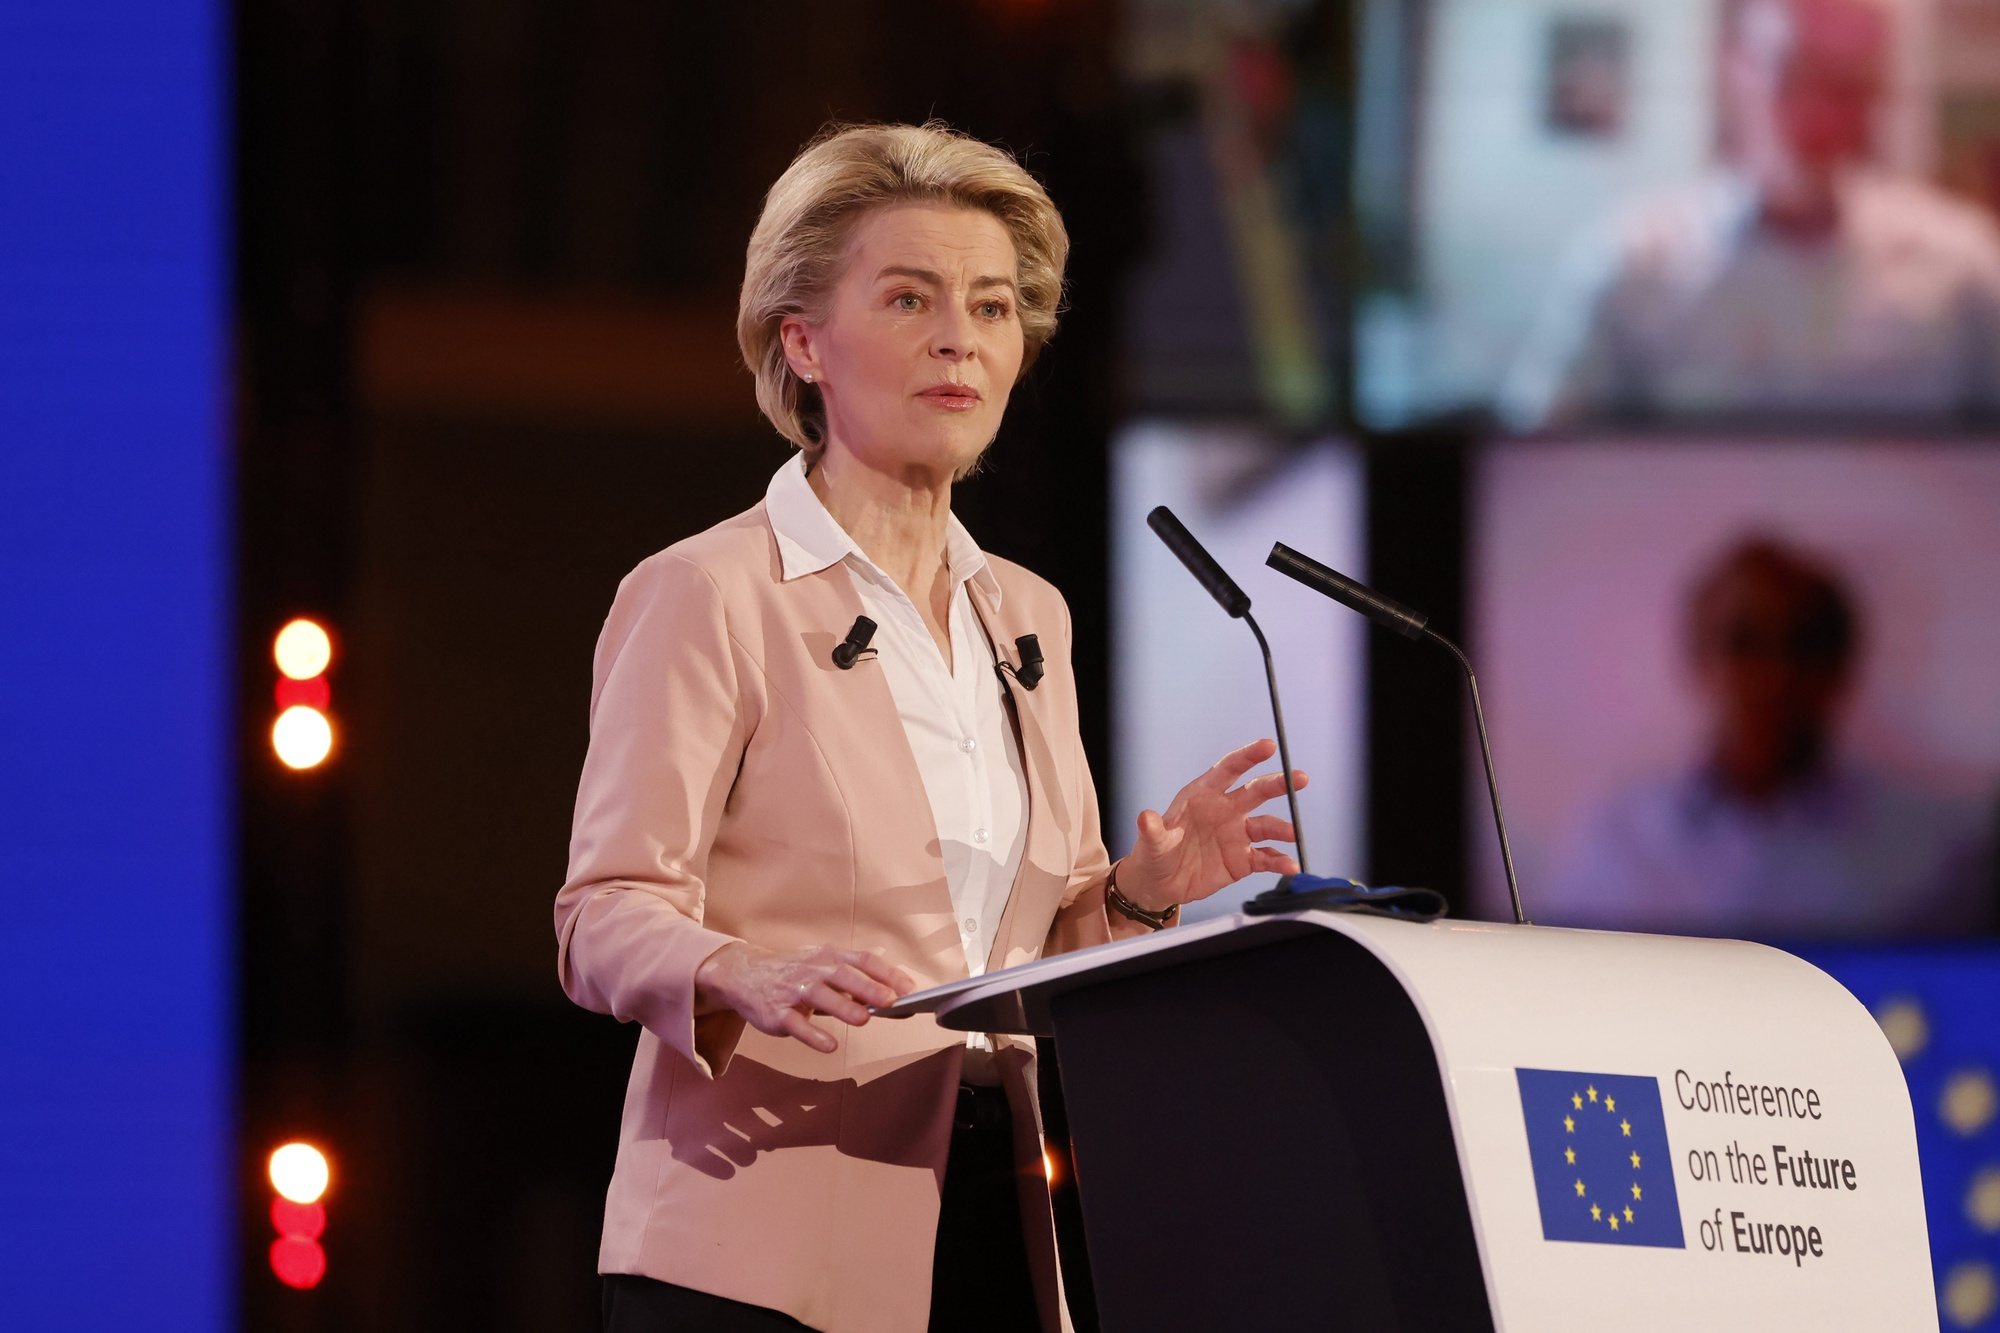 epa09187683 European Commission President Ursula von der Leyen delivers her speech during the Future of Europe conference at the European Parliament in Strasbourg, eastern France, Sunday, May 9, 2021.  EPA/Jean-Francois Badias / POOL  MAXPPP OUT